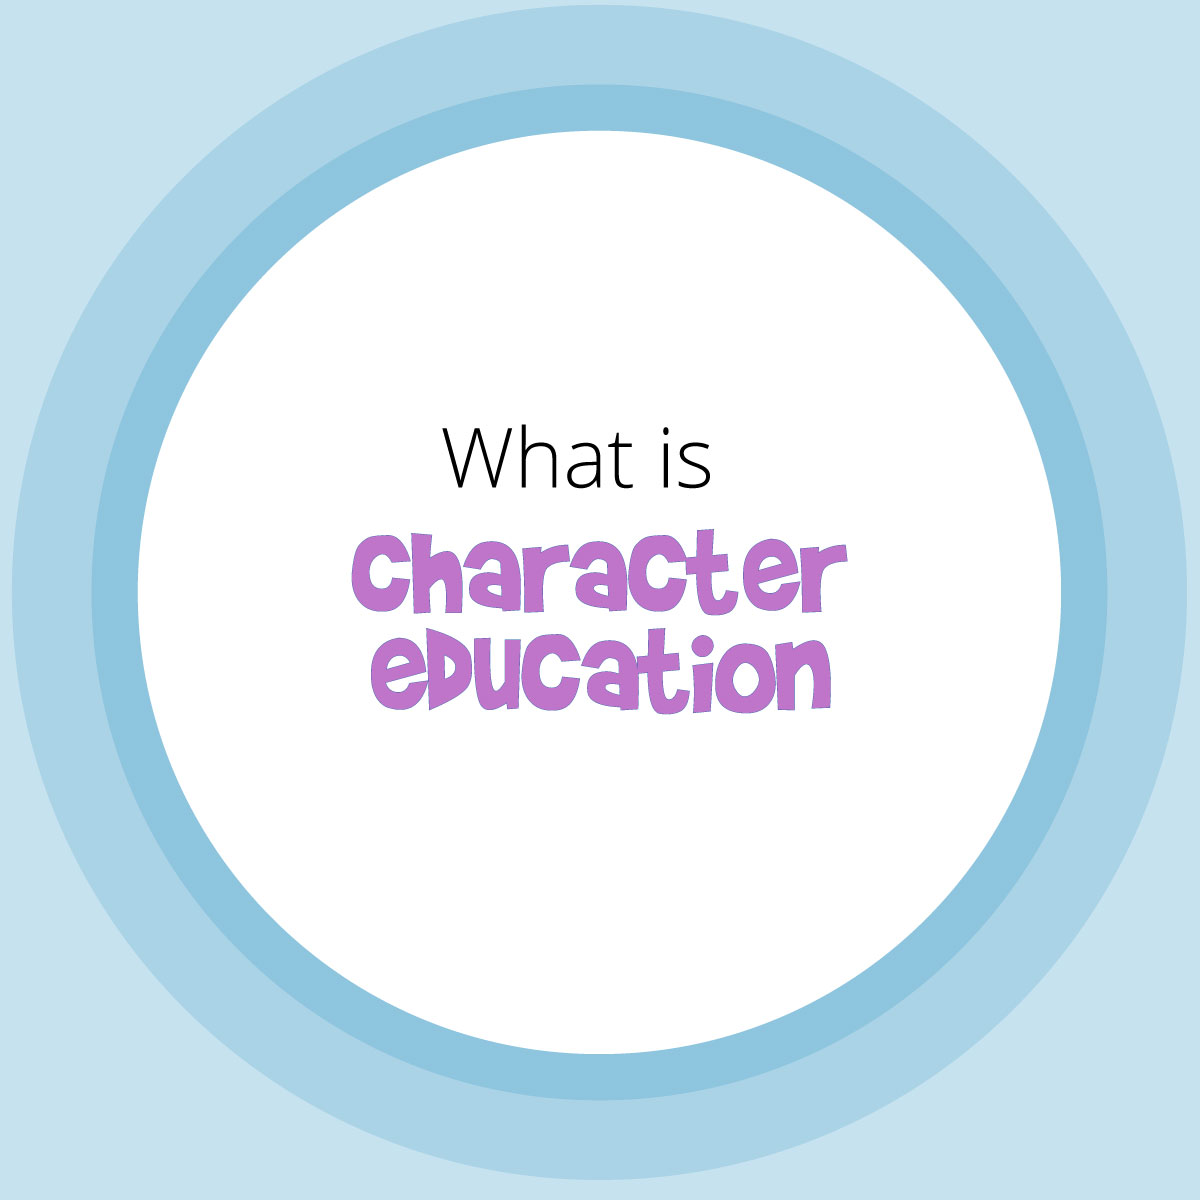 What is character education?